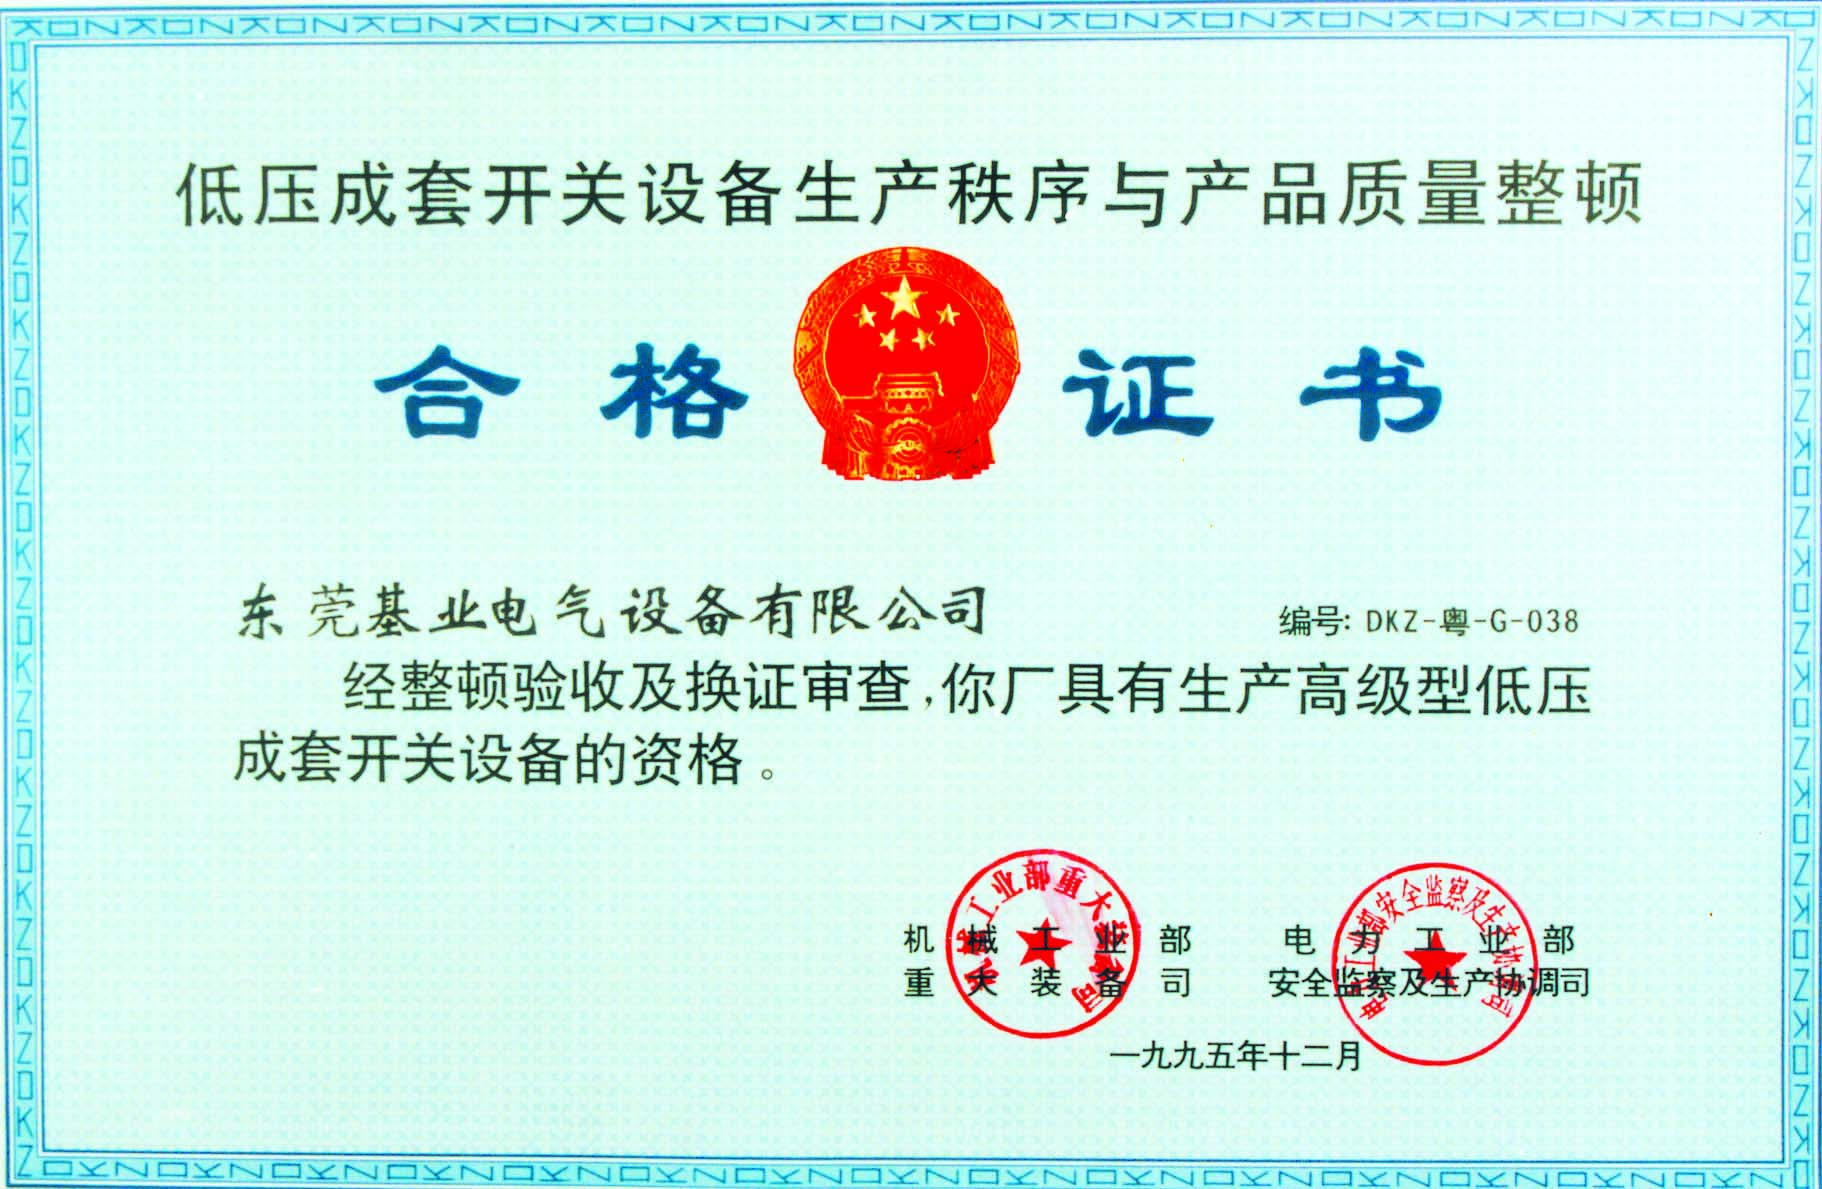 China Permit of Production (Low Voltage)